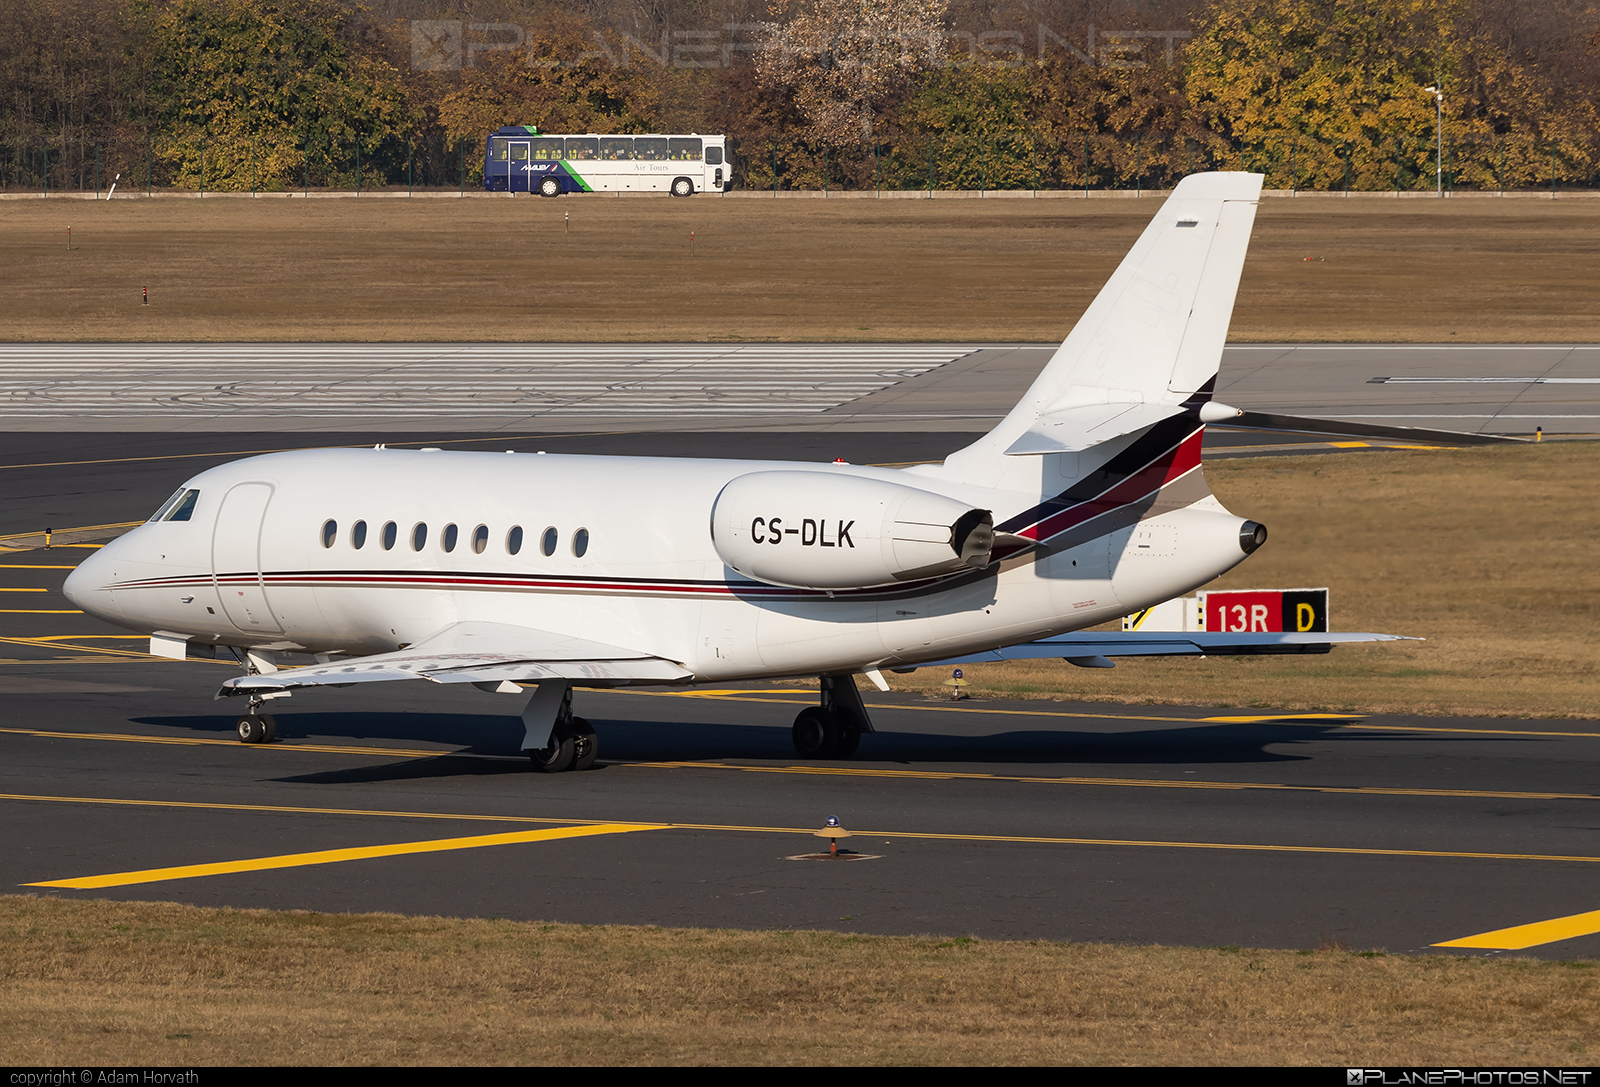 Dassault Falcon 2000EX - CS-DLK operated by NetJets Europe #dassault #dassaultfalcon #dassaultfalcon2000 #dassaultfalcon2000ex #falcon2000 #falcon2000ex